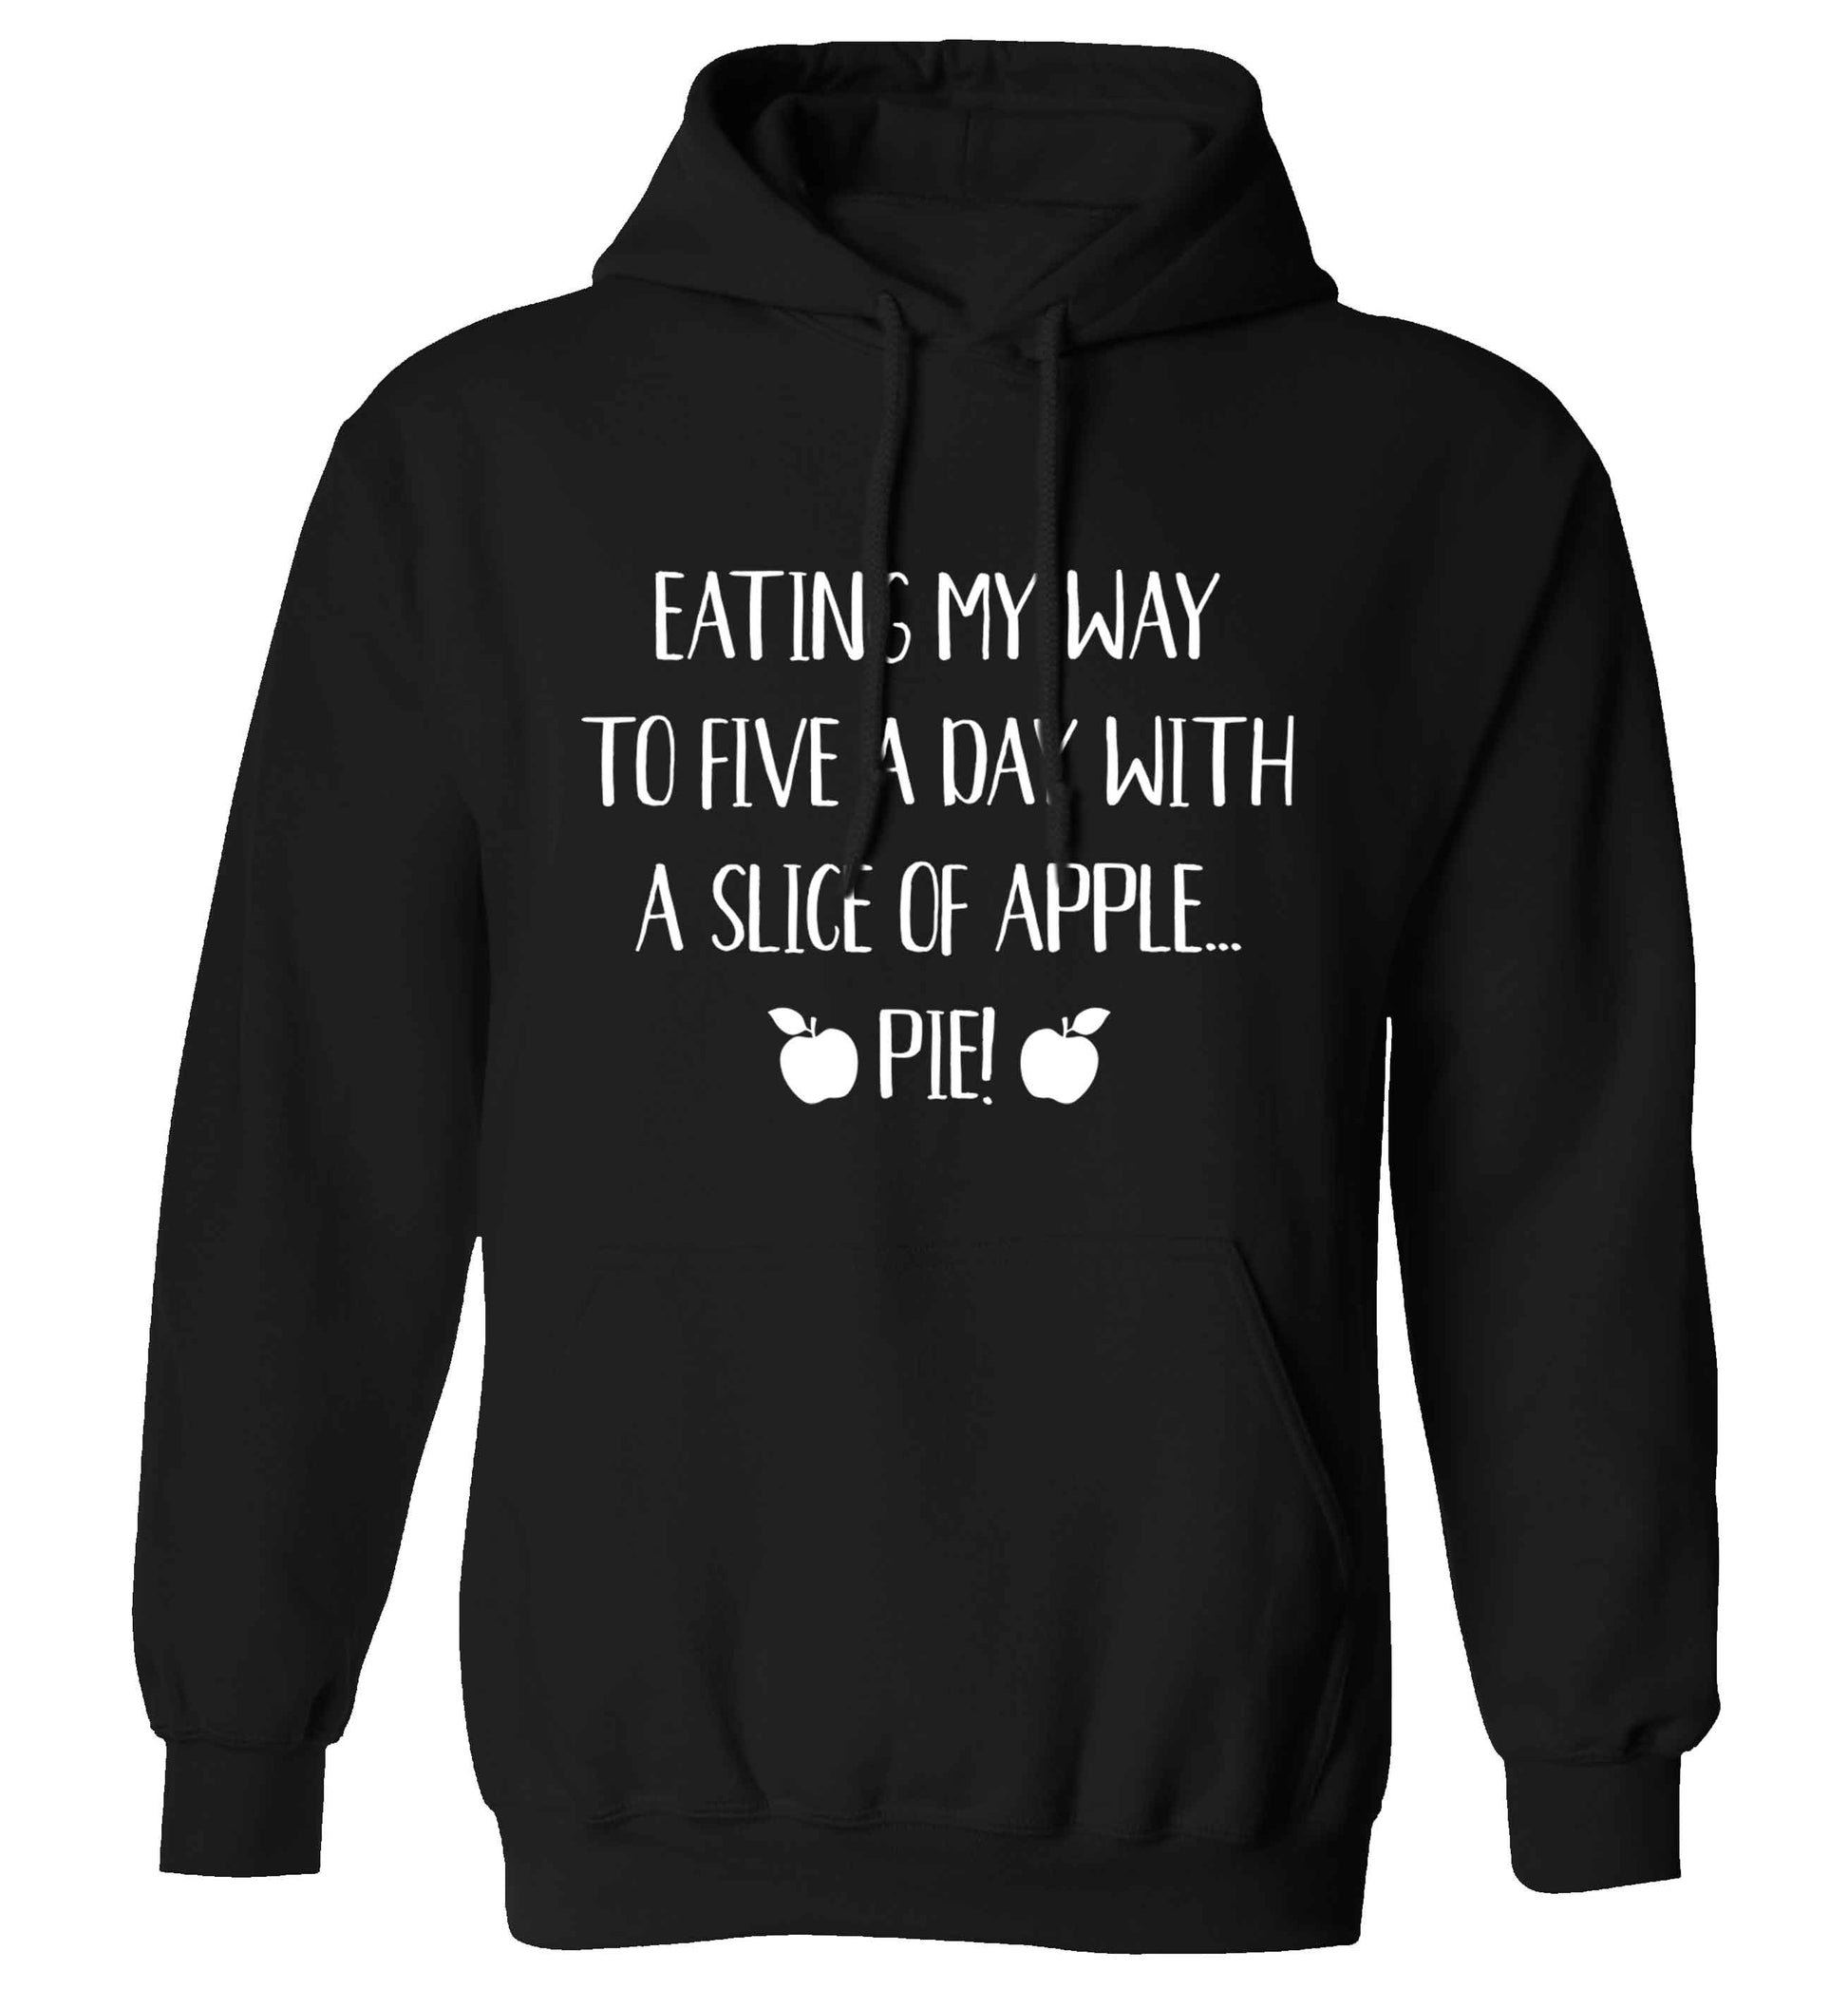 Eating my way to five a day with a slice of apple pie adults unisex black hoodie 2XL